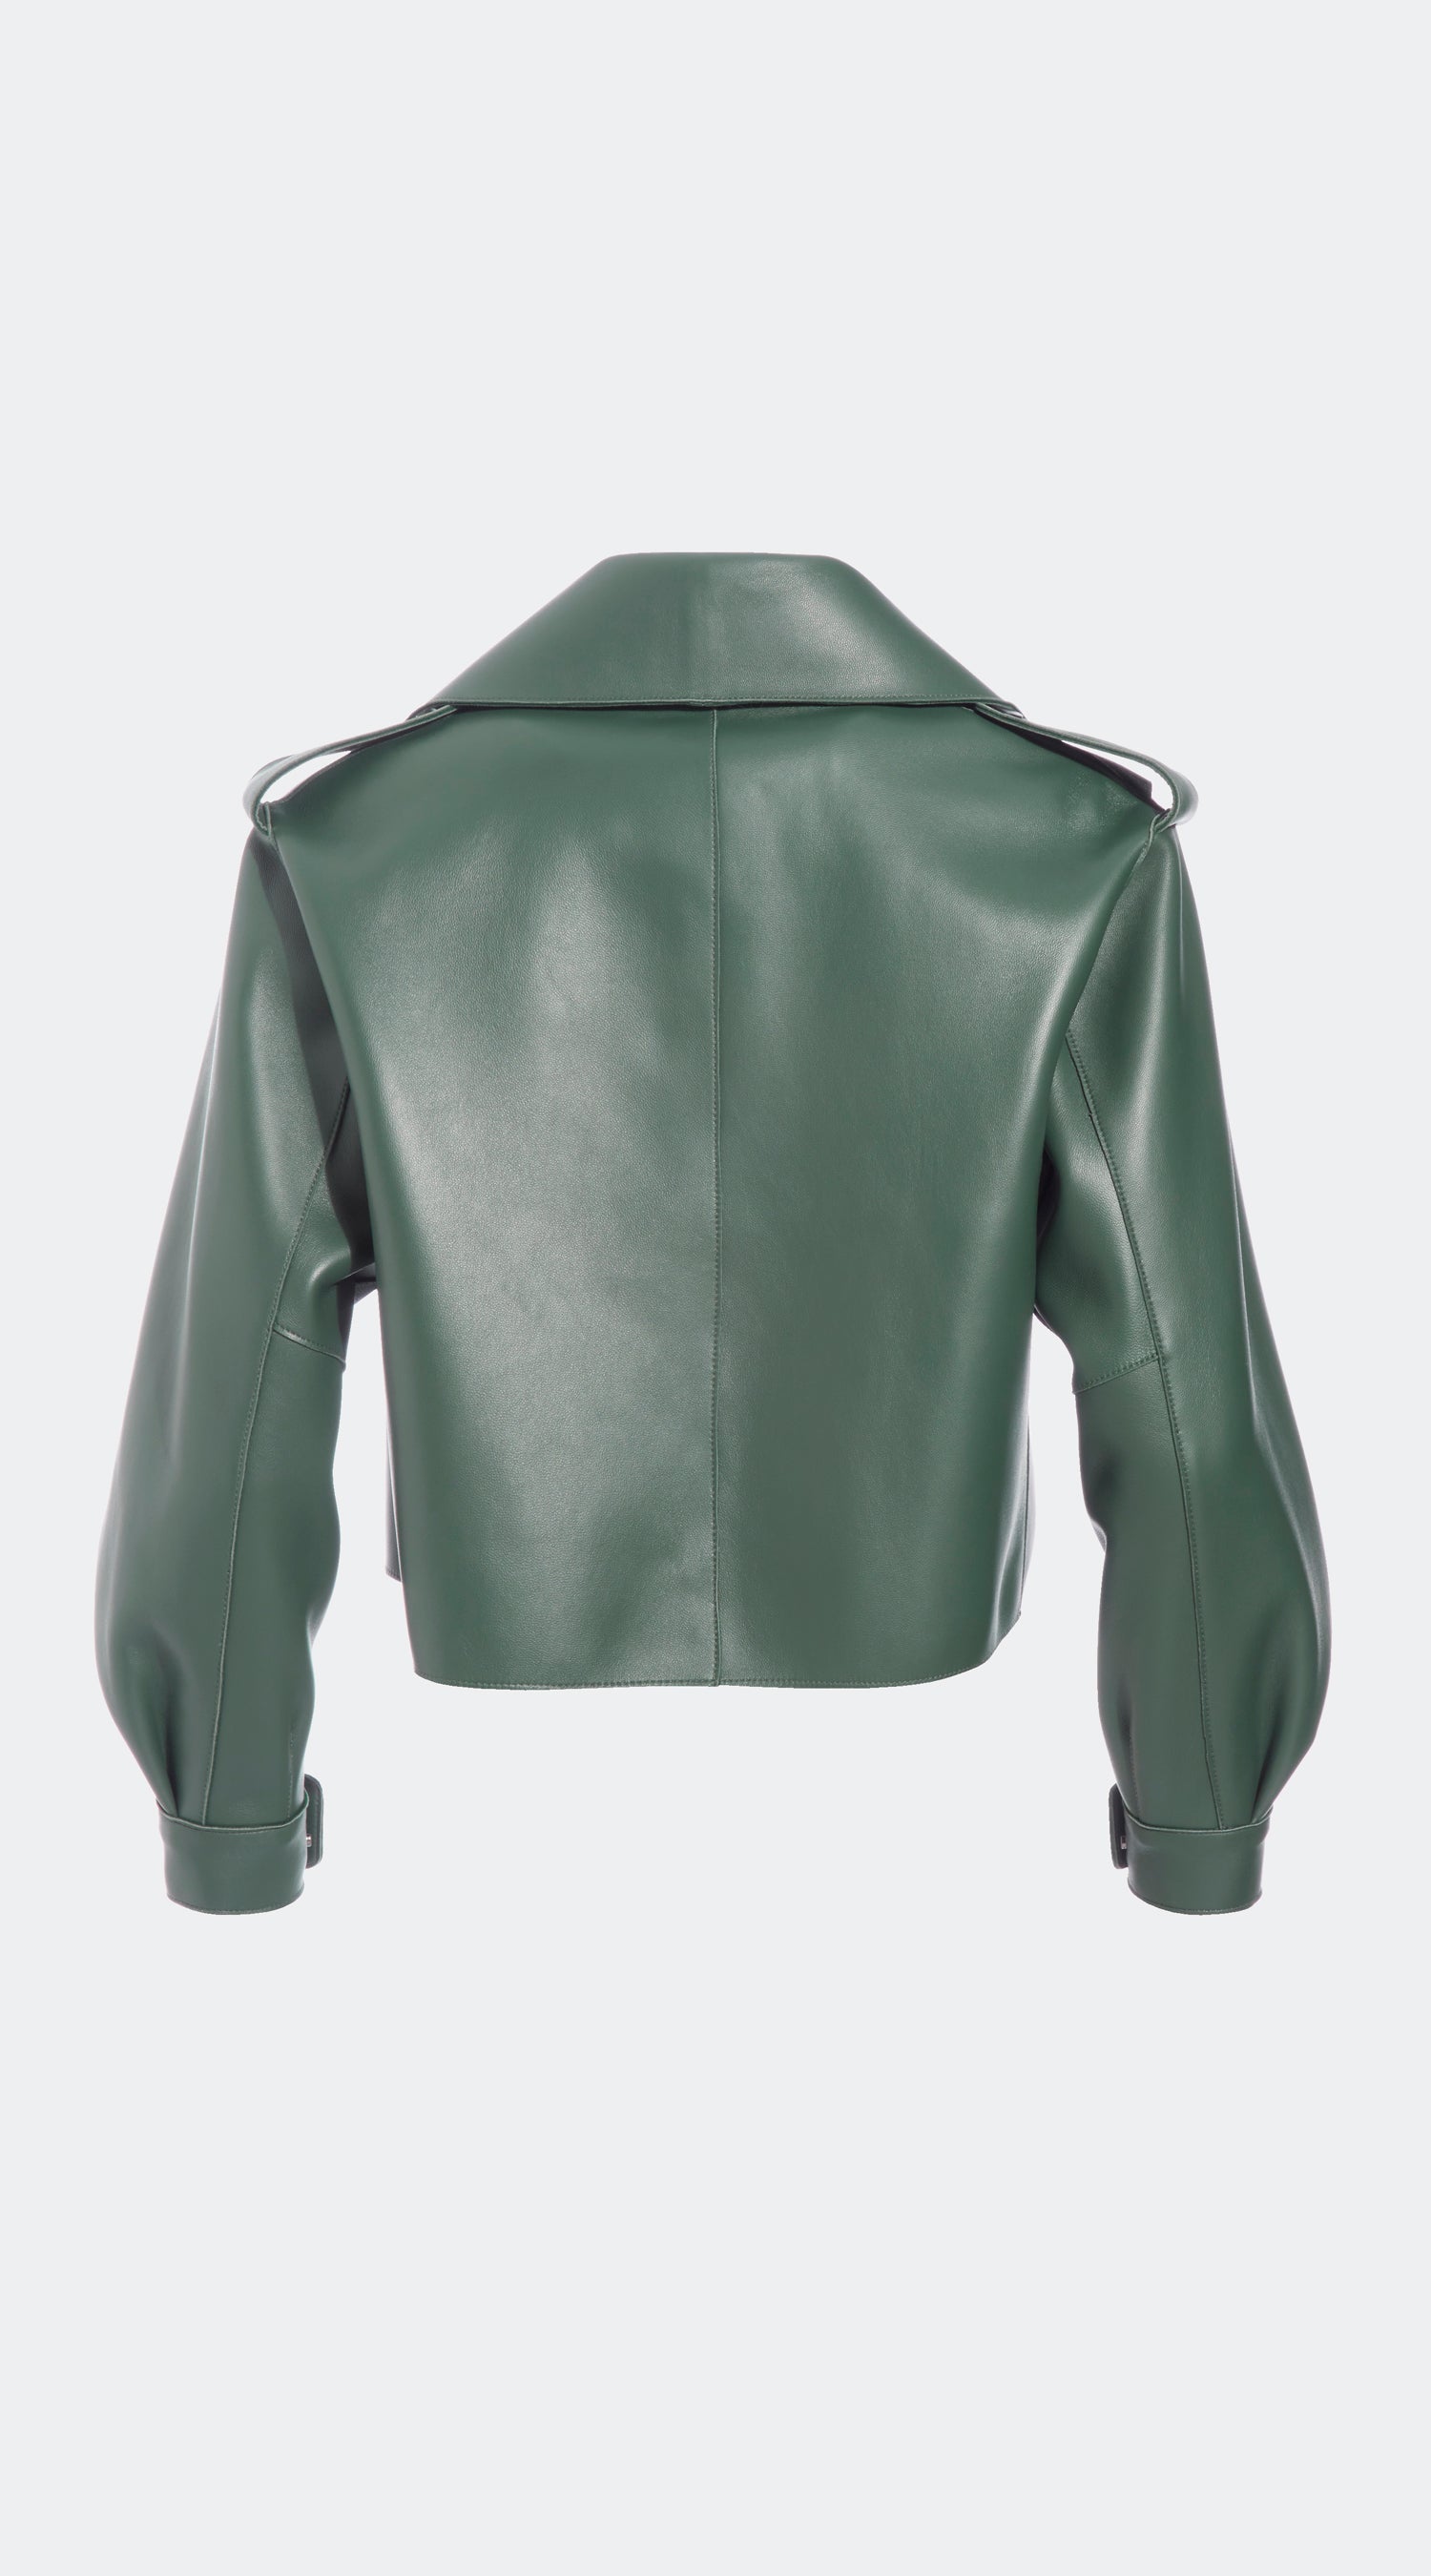 OUTLET Luxy Oversized Leather Jacket - Emerald Green